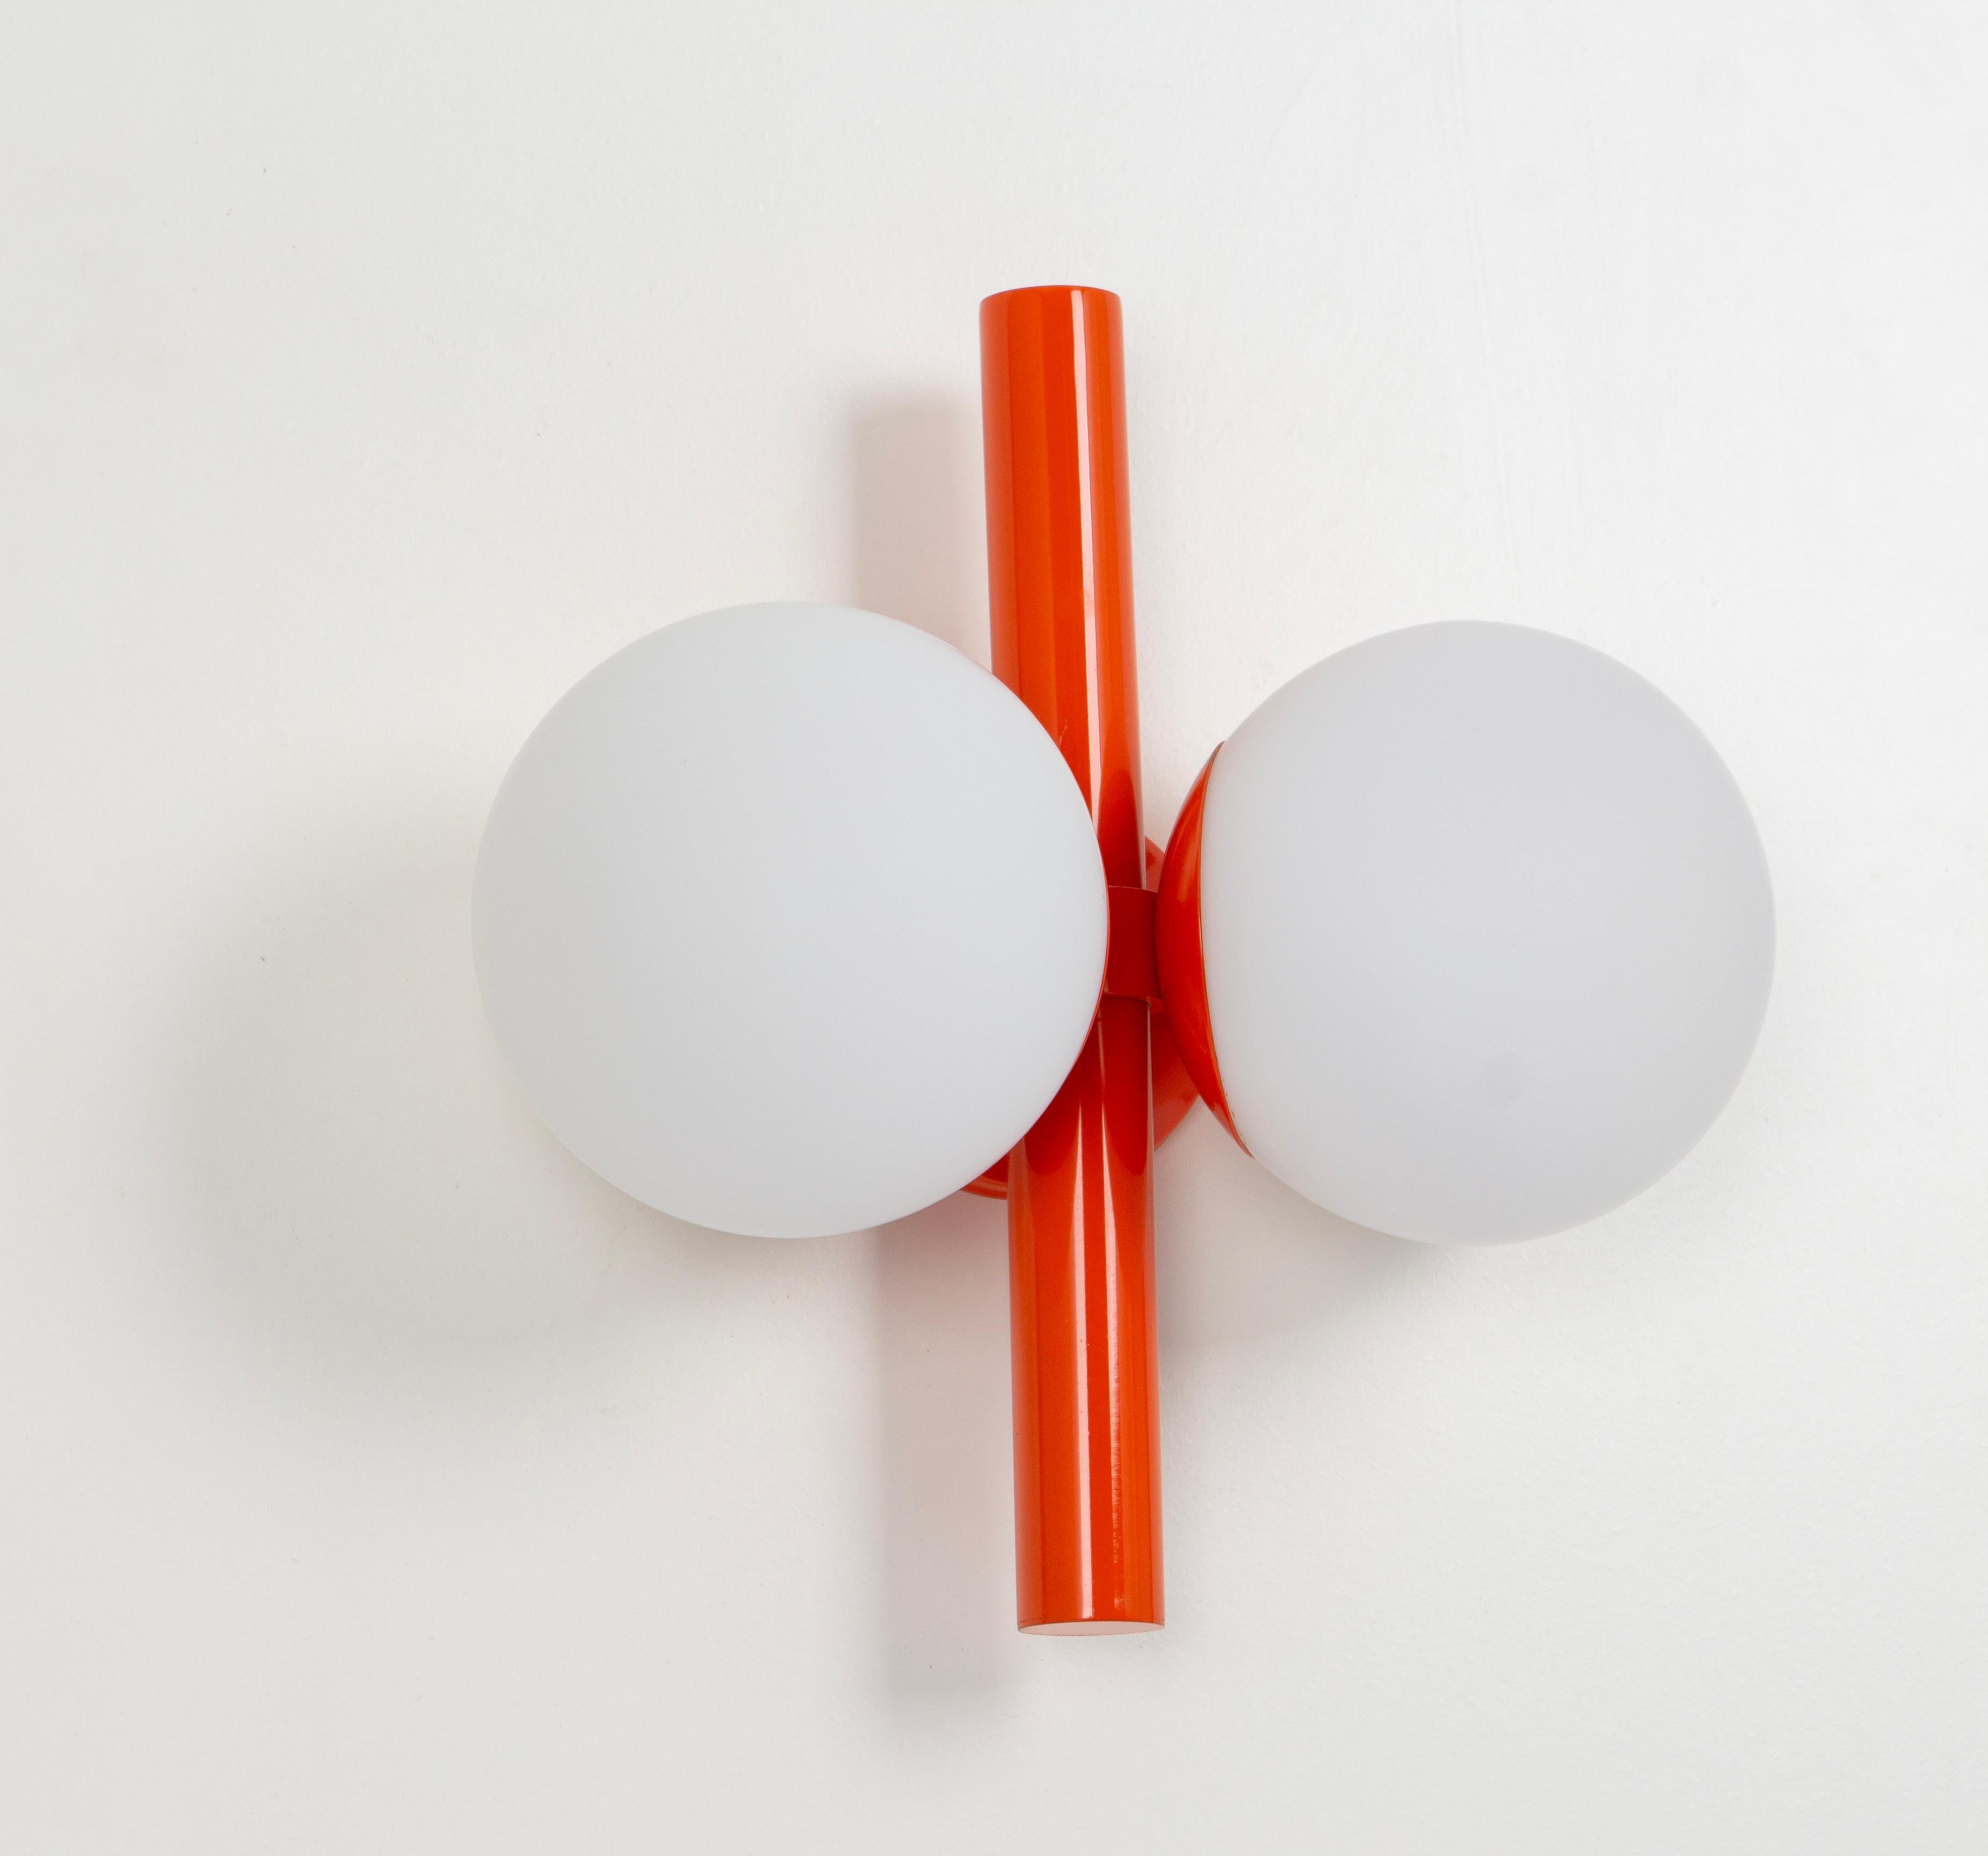 1 of 3 Midcentury Orbital Wall lights in Orange by Kaiser, Germany, 1970s For Sale 1